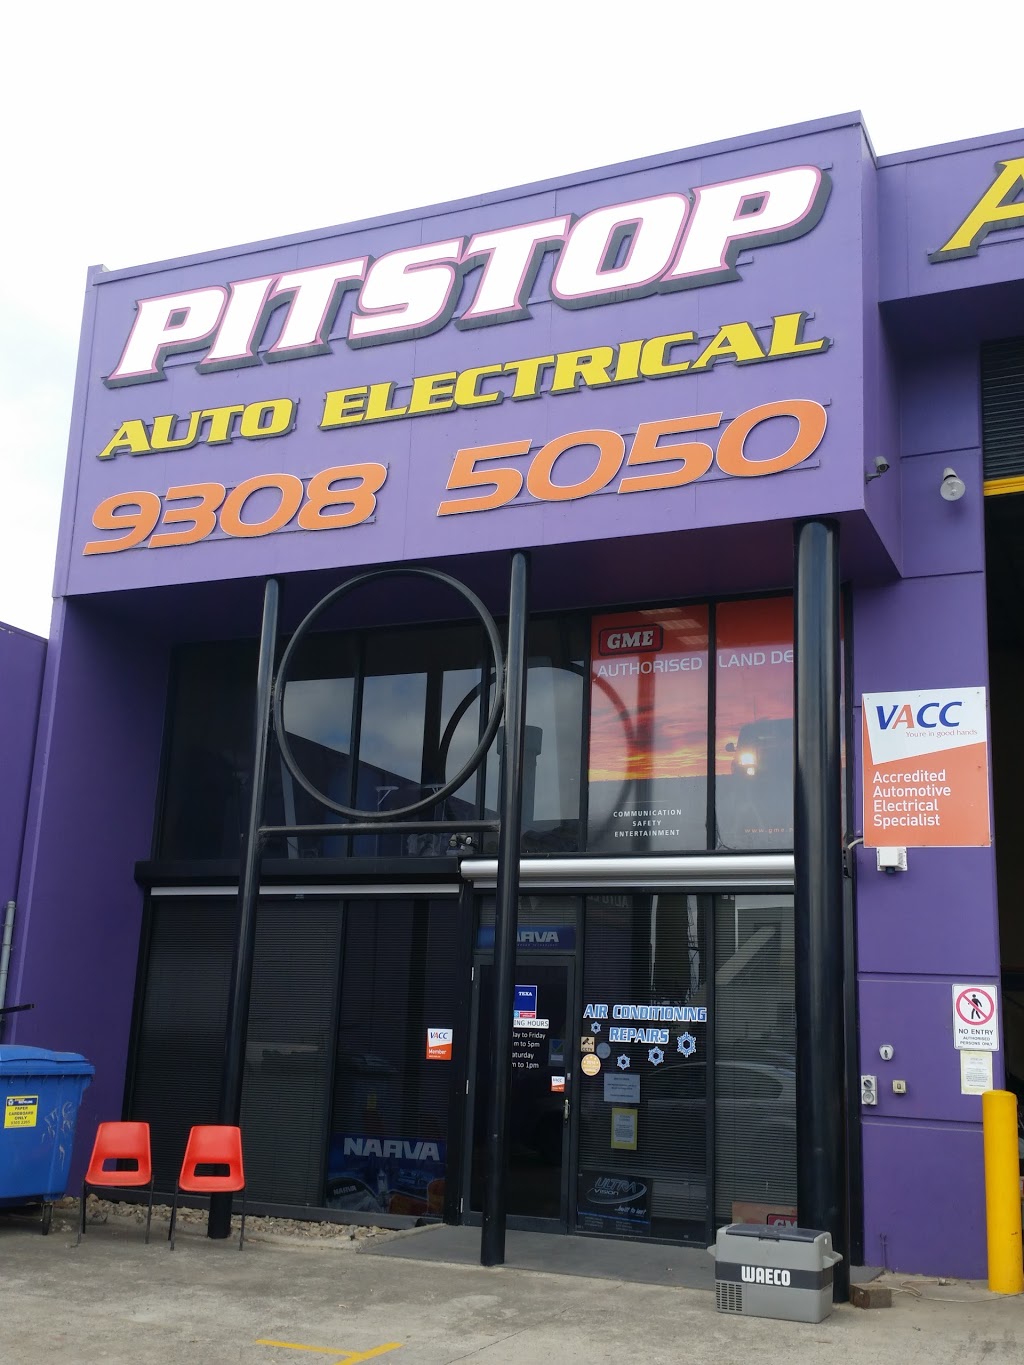 Pitstop Auto Electrical | electronics store | 31 Thornycroft St, Campbellfield VIC 3061, Australia | 0393085050 OR +61 3 9308 5050